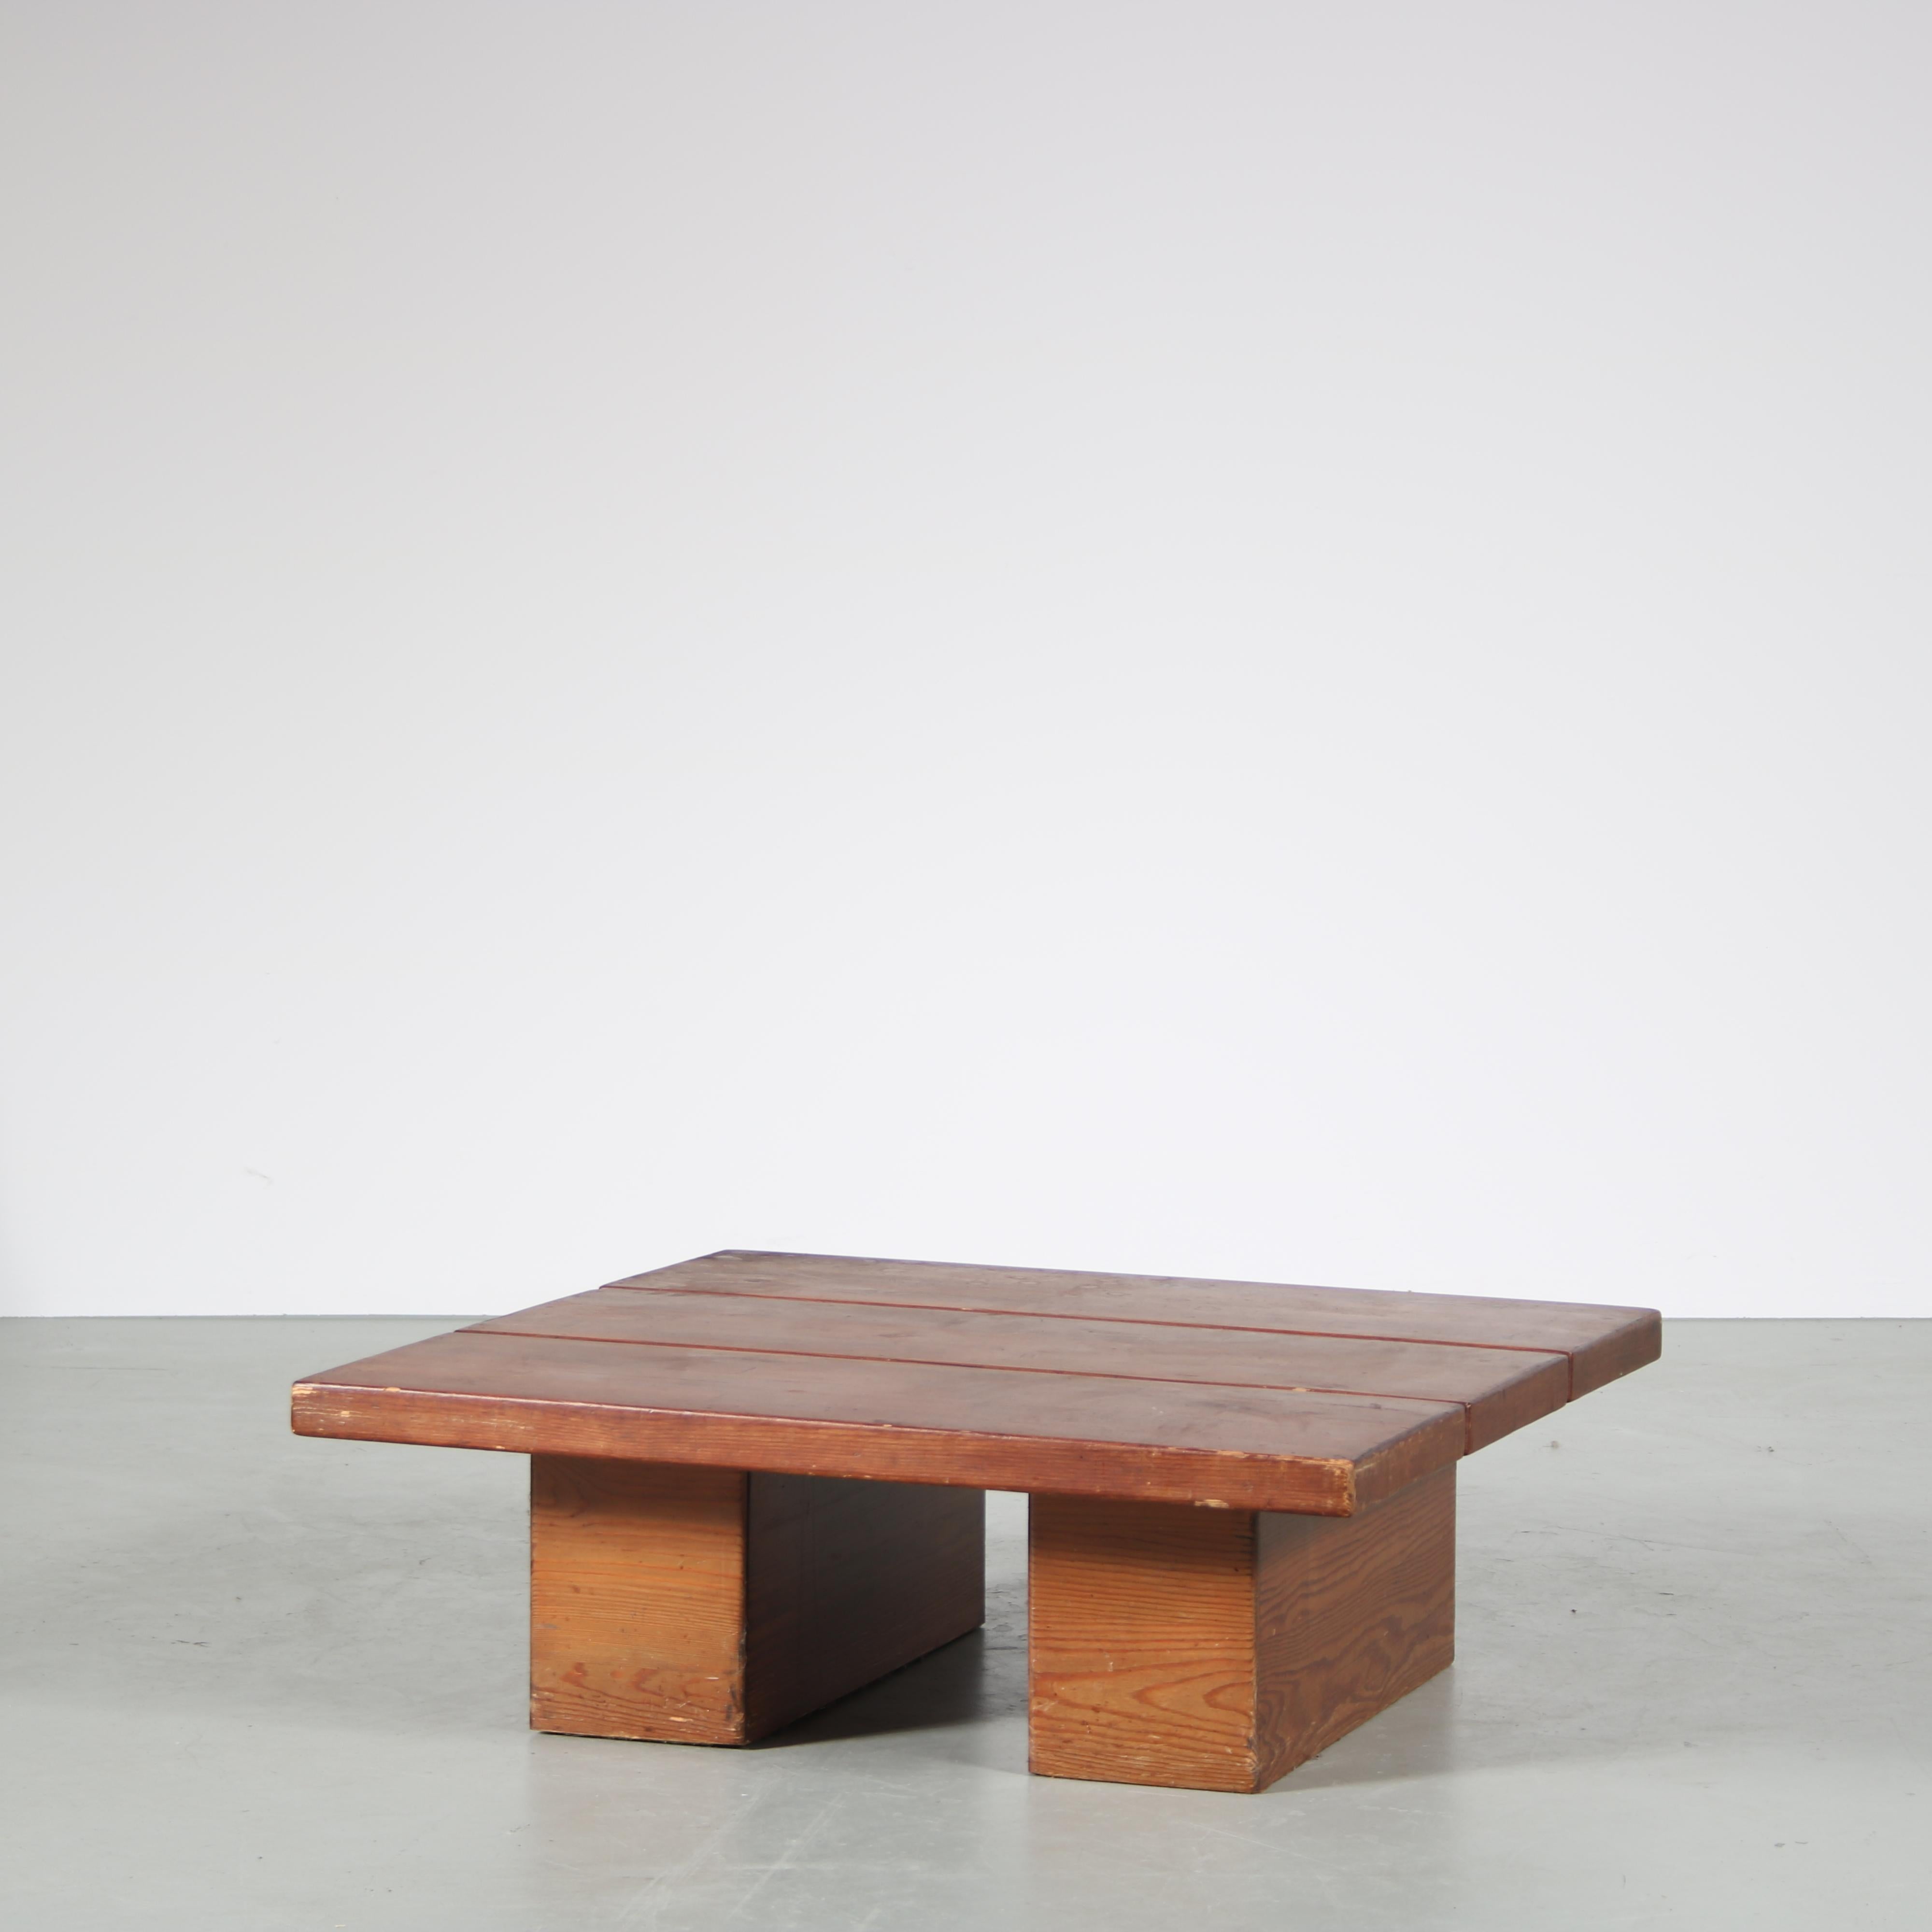 This is an eye-catching wooden coffee table designed by Ilmari Tapiovaara, manufactured by Laukaan Puu in Finland around 1950.

It is made of high quality pine wood in a beautiful warm brown colour. The thick base consists of two sturdy